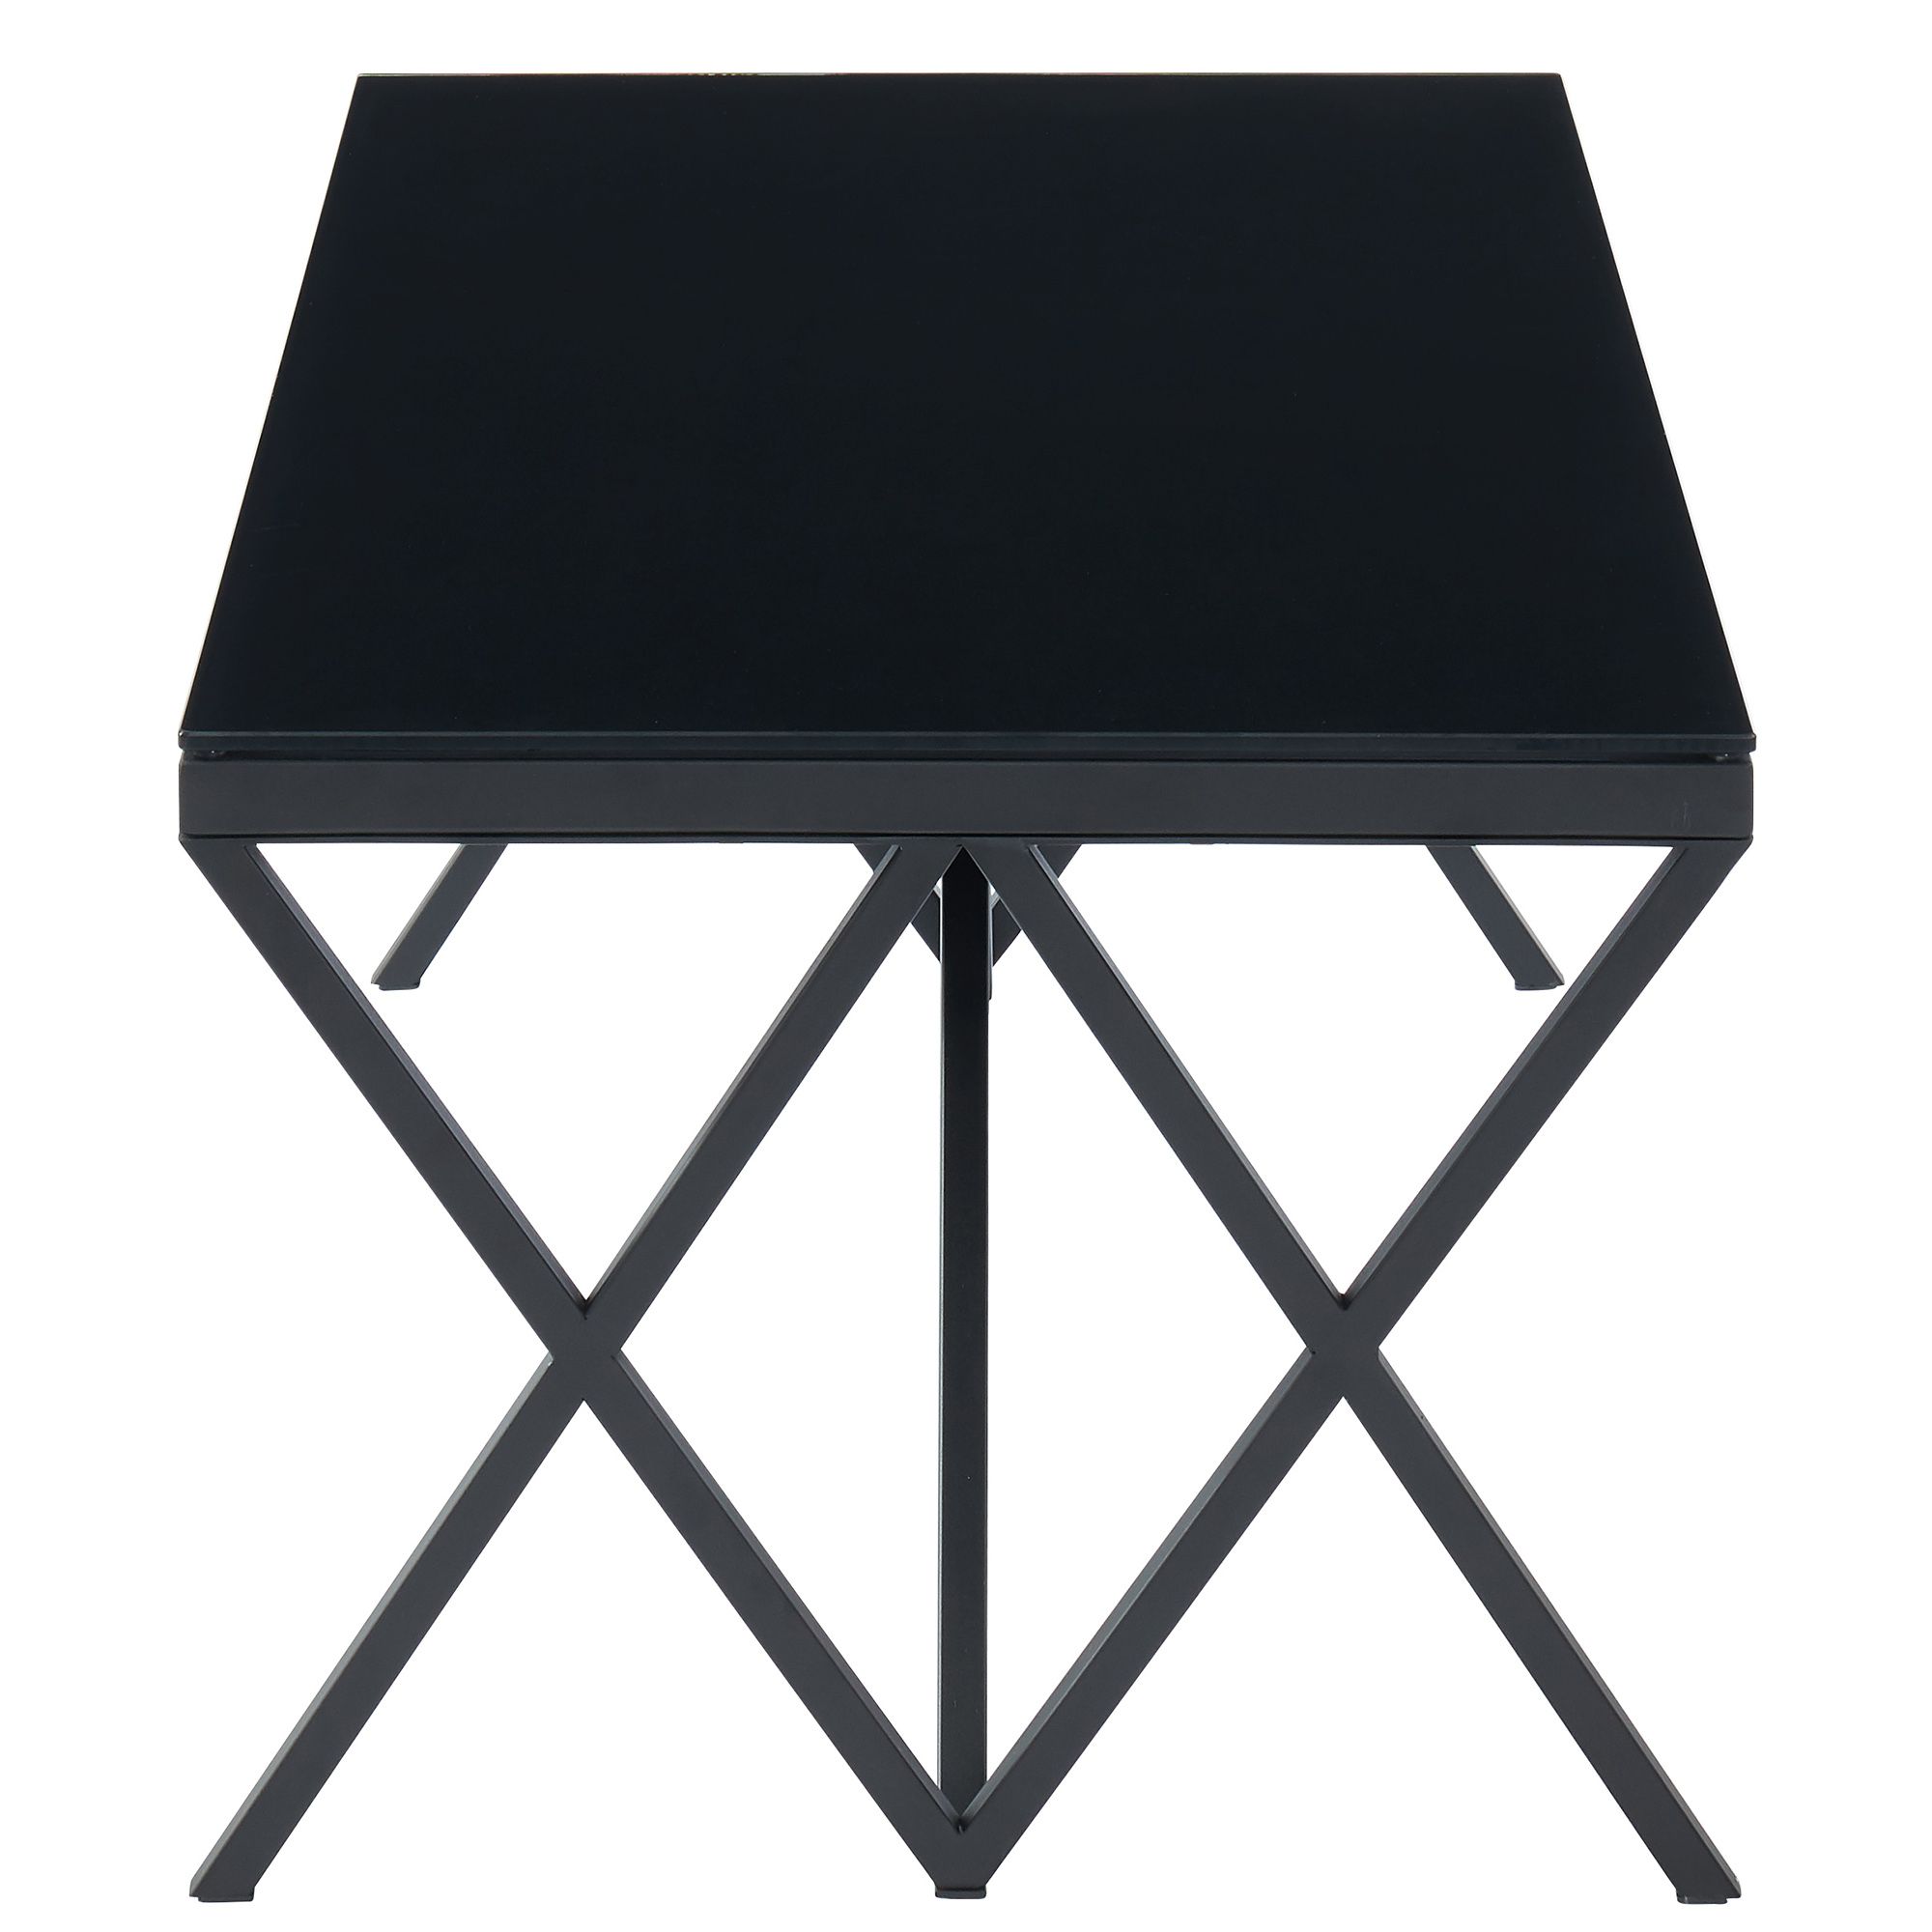 Calix Coffee Table In Black – Aux Merveilles With Regard To Addison&lane Calix Square Tables (Gallery 17 of 20)